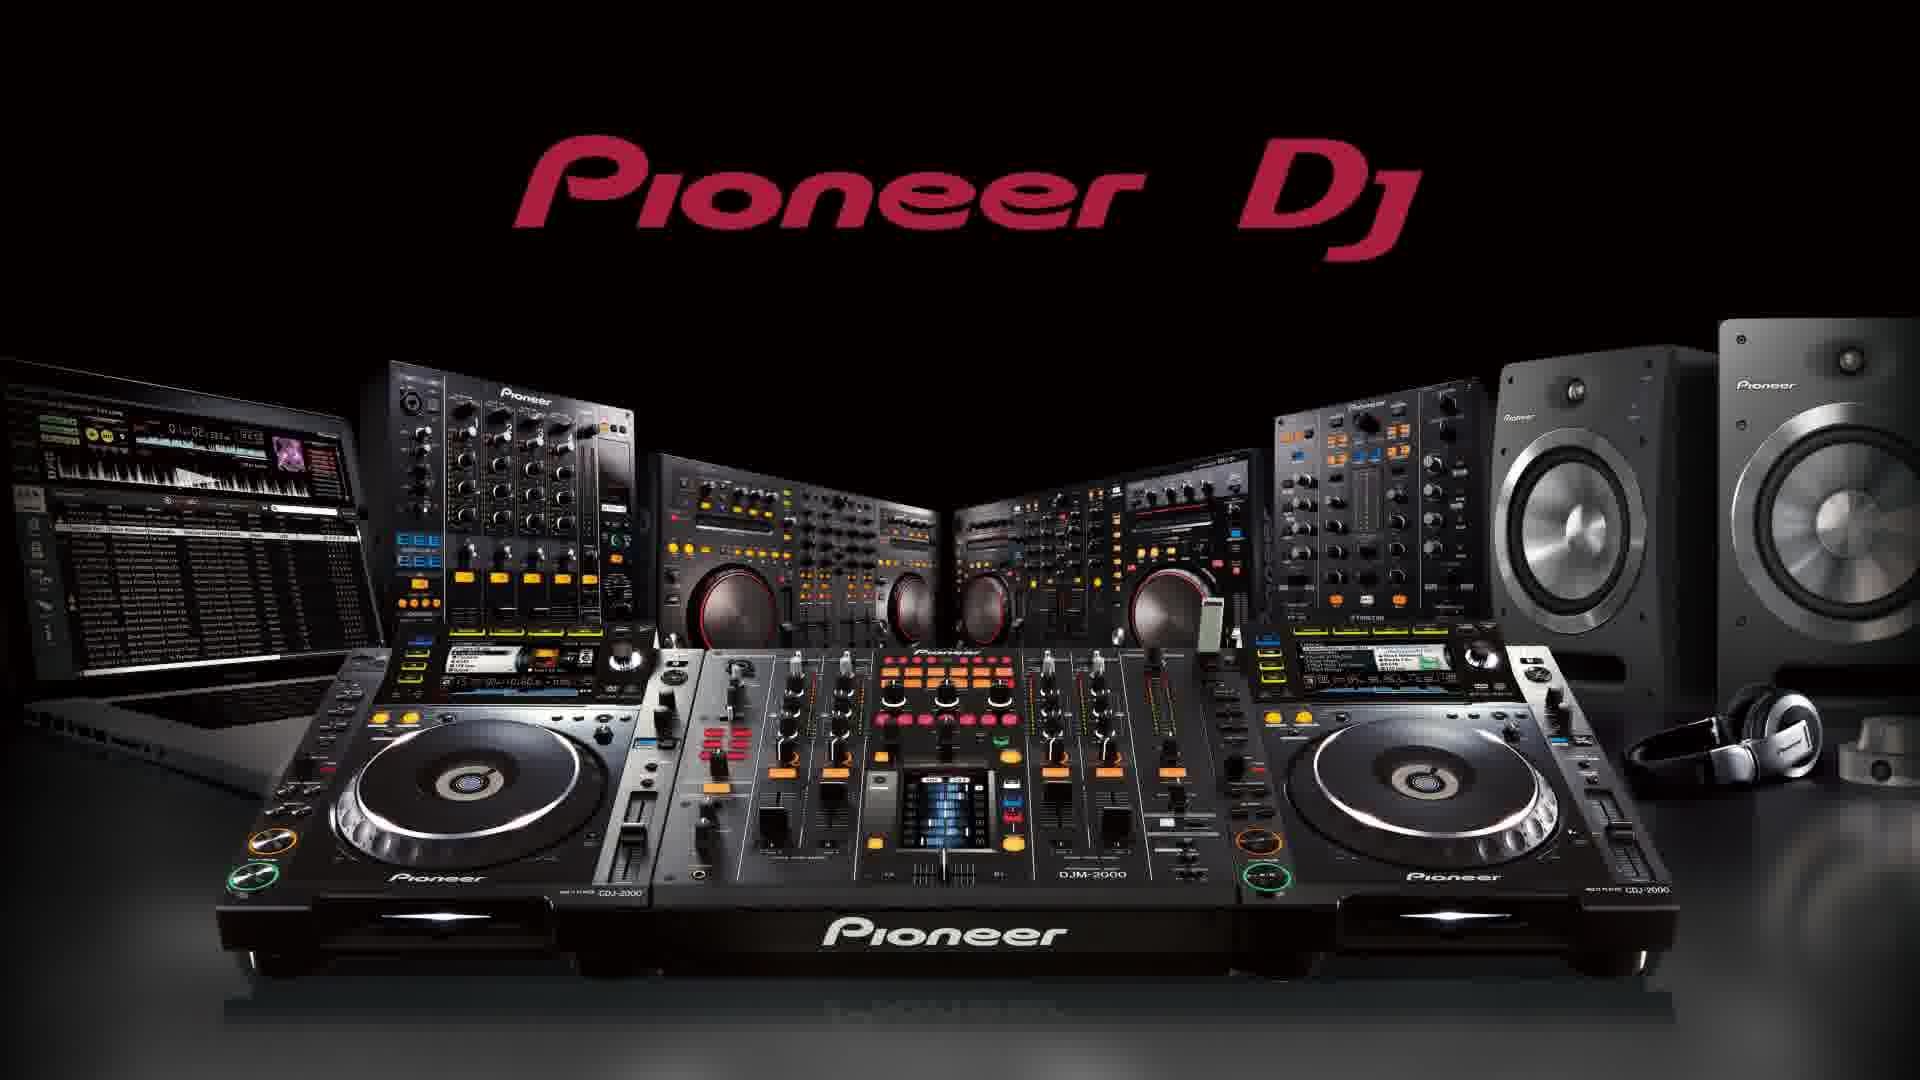 1920x1080 DJ Backgrounds Free Download | Wallpapers, Backgrounds, Images .